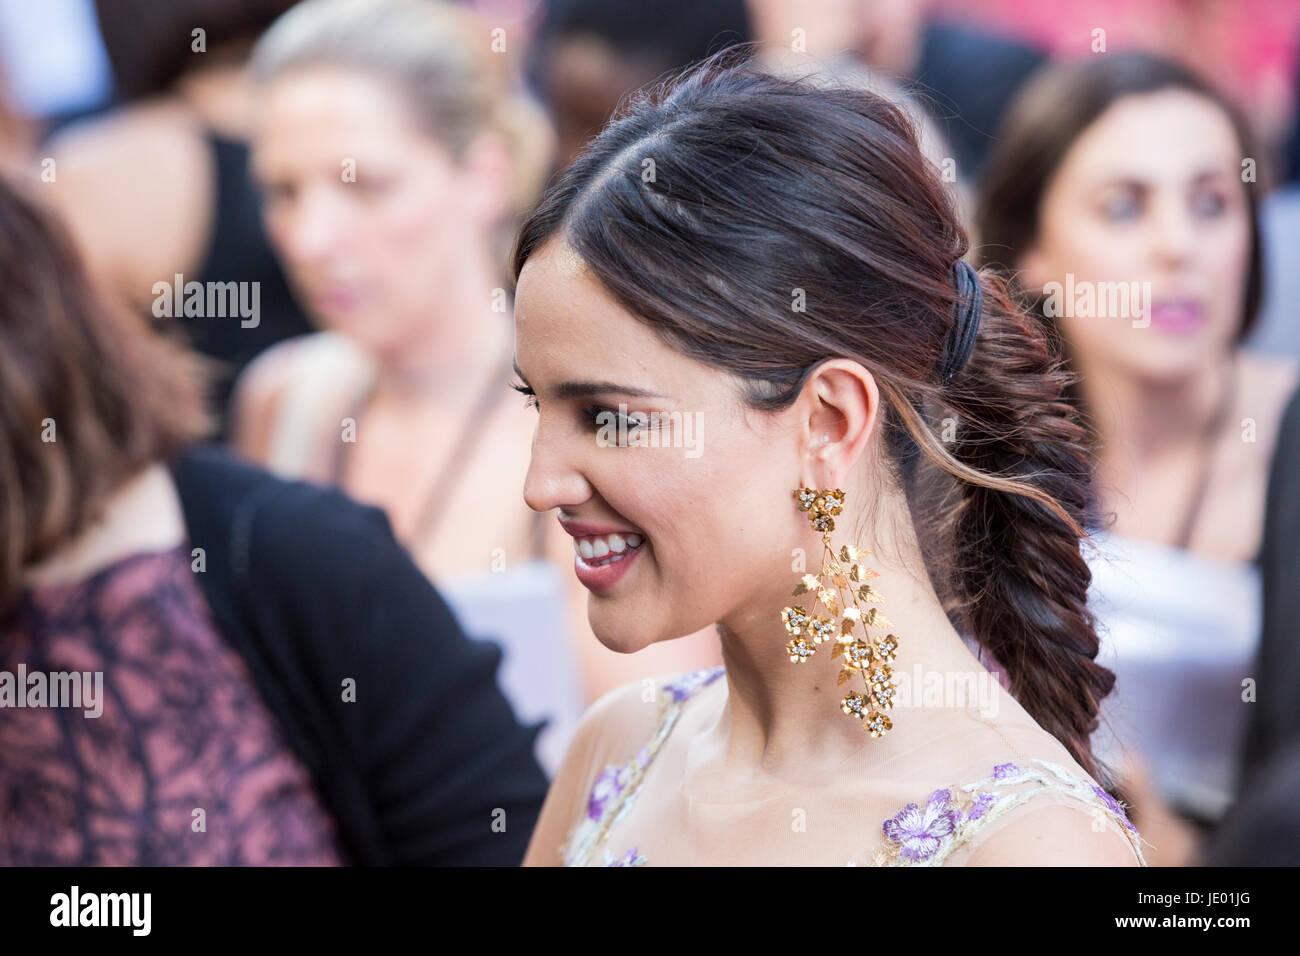 London, UK. 21st June, 2017. Actress Eiza González arrives for the European Premiere of Baby Driver directed by Edgar Wright. Credit: Bettina Strenske/Alamy Live News Stock Photo